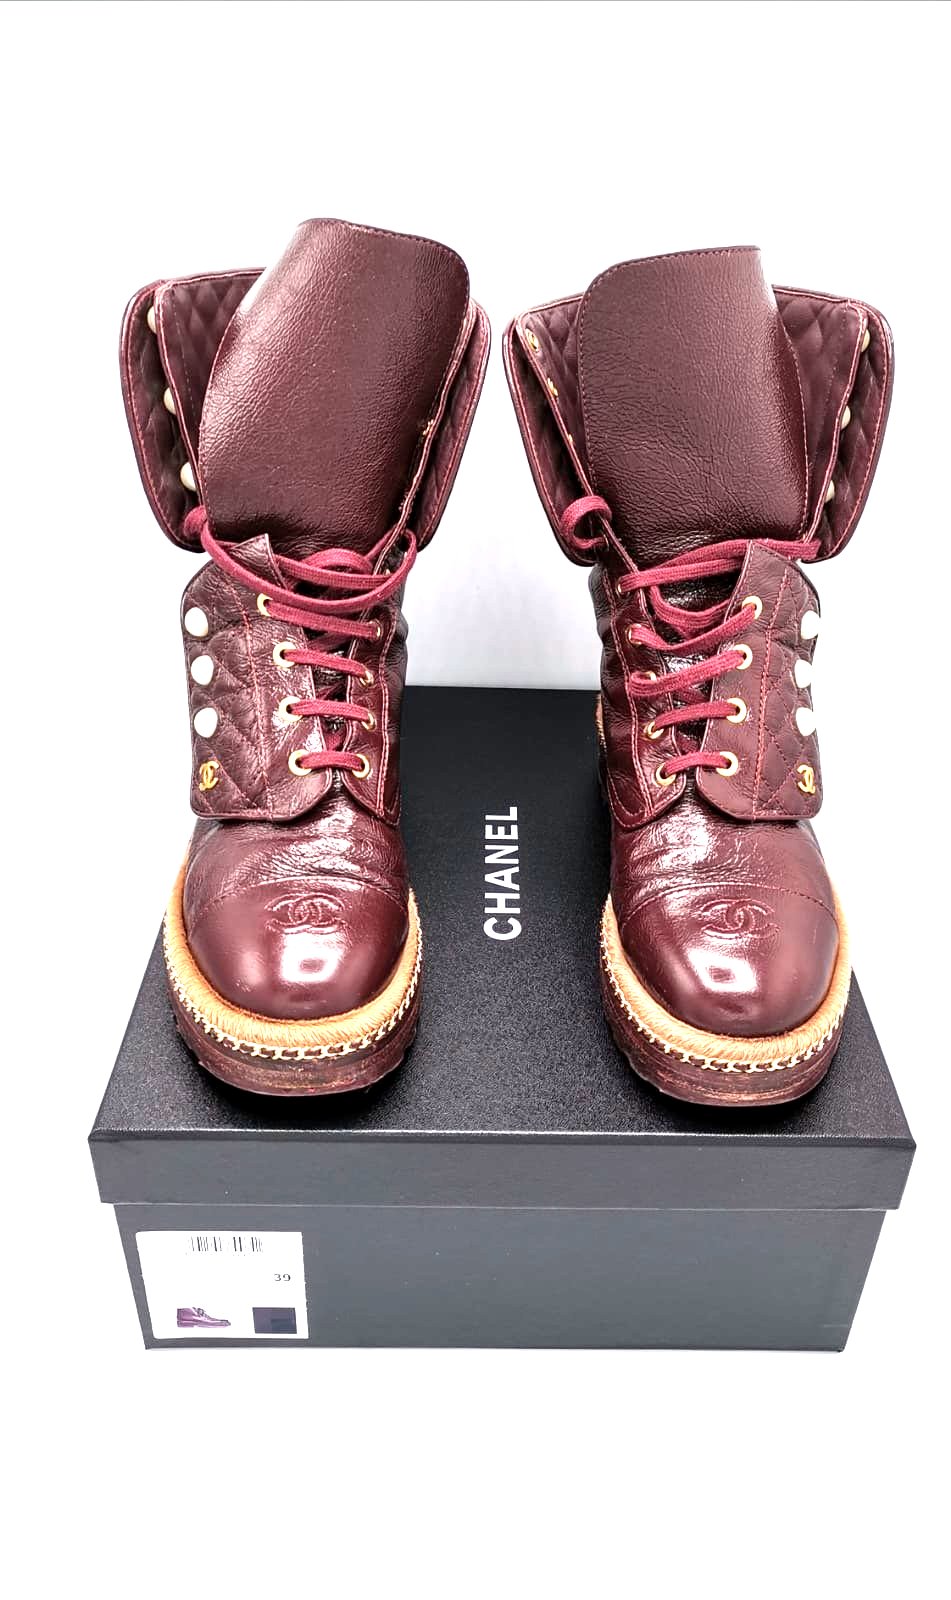 CHANEL combat boots size 38.5